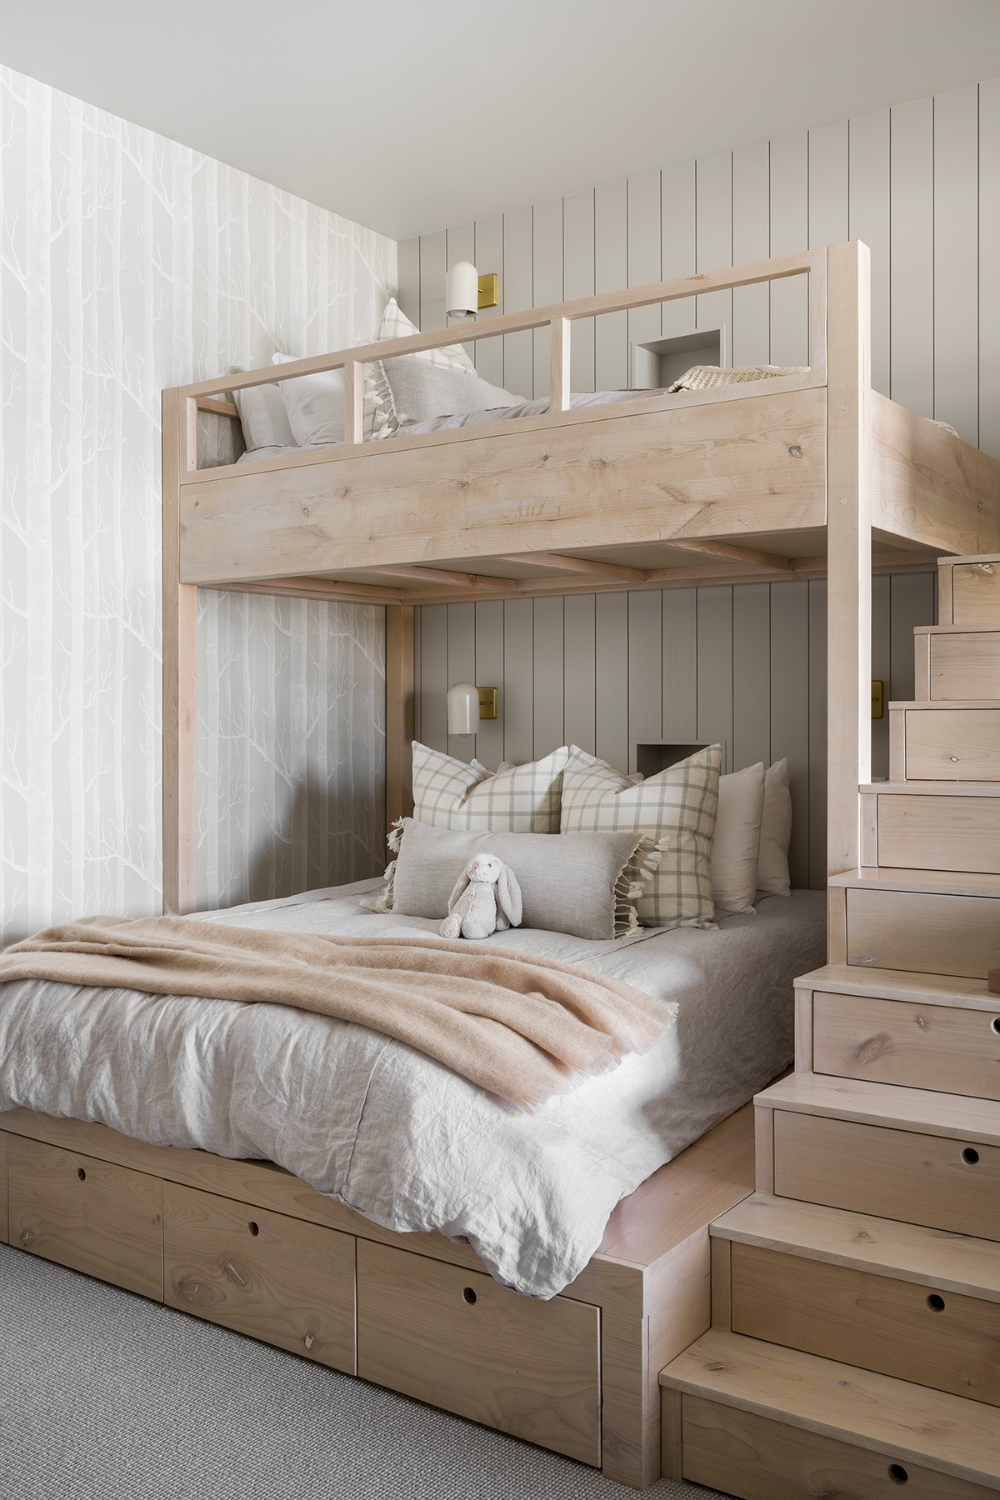 Some Materials Used For Bunk Beds